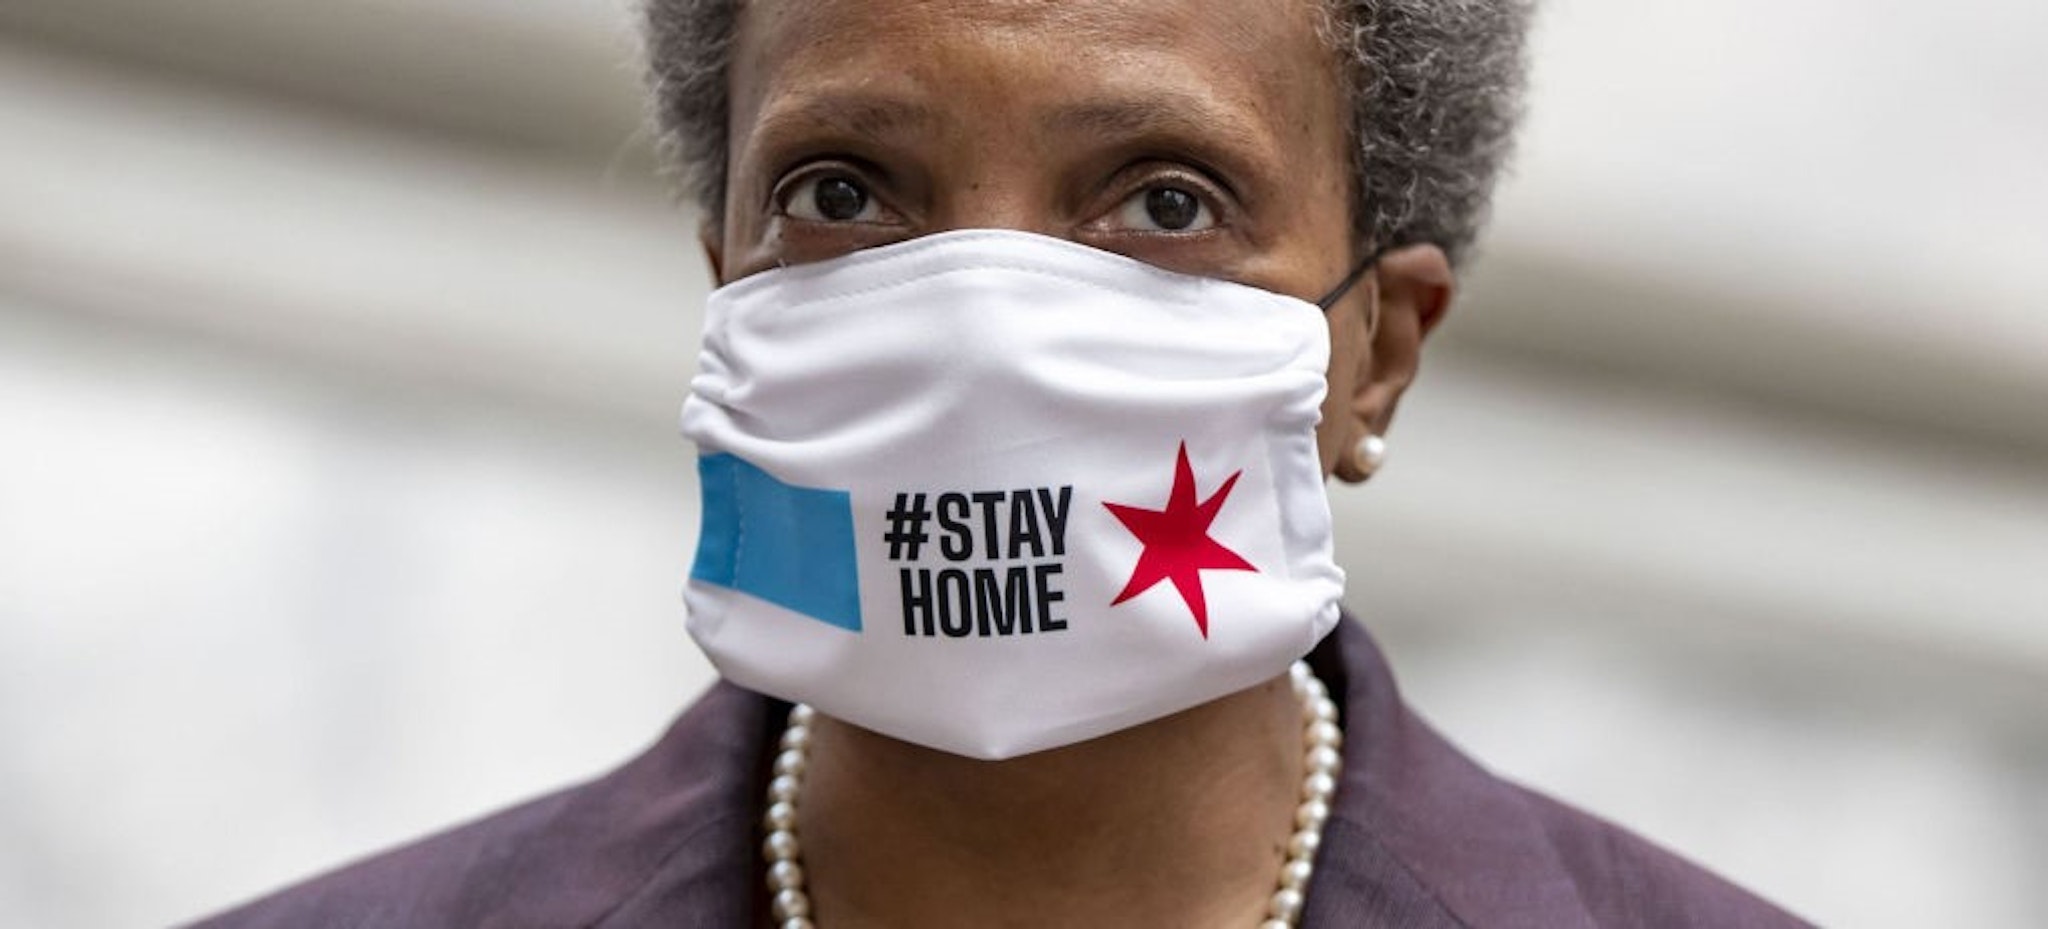 Chicago mayor Lori Lightfoot wears a mask as she prepares to speak about the city's coronavirus economic recovery plan on April 23, 2020.